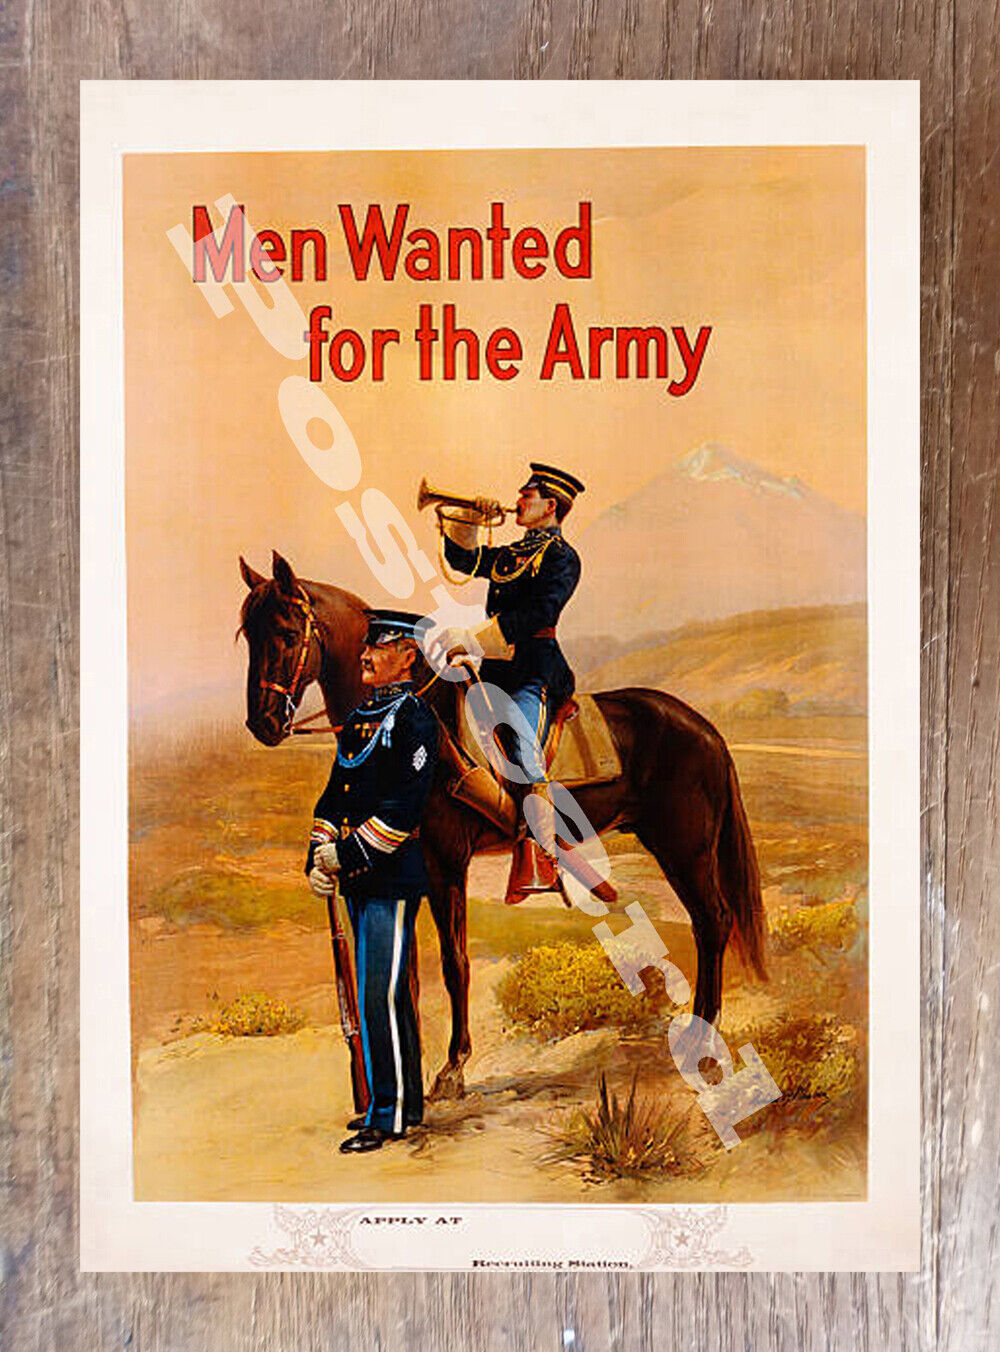 Historic Men Wanted for the Army Recruitment Postcard 1